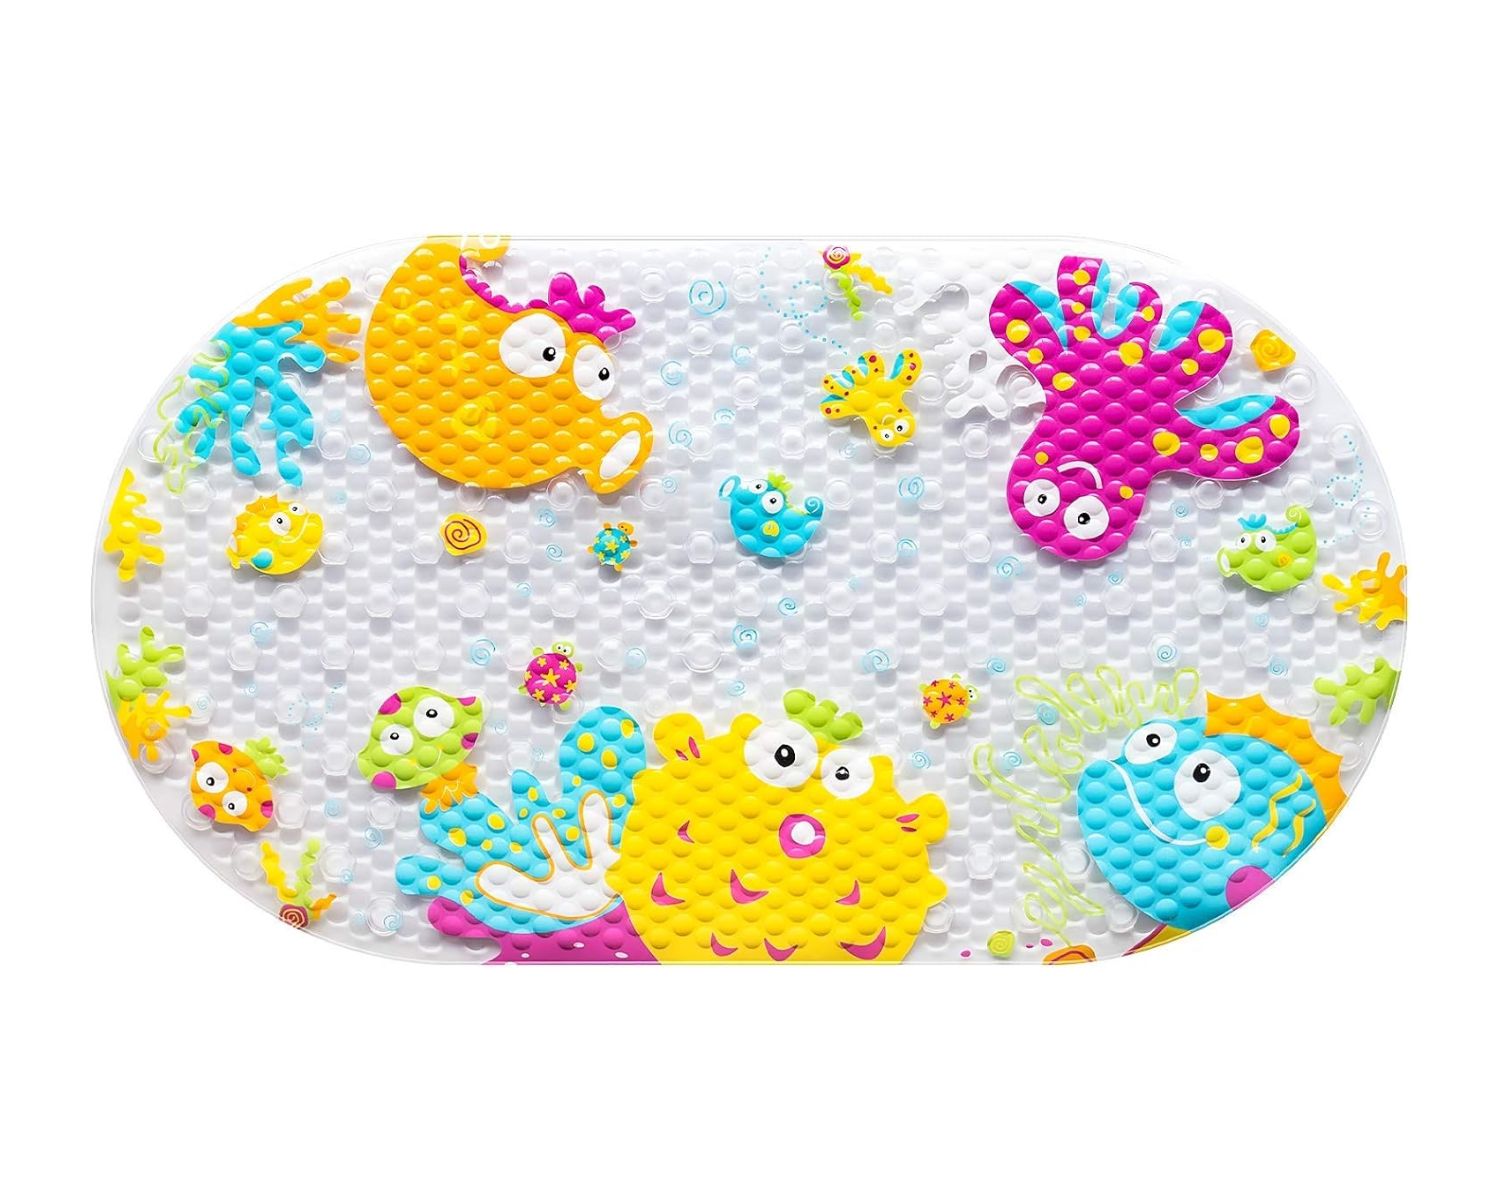 Baby Bathtub Mat Review: A Must-Have for Safe Bath Time